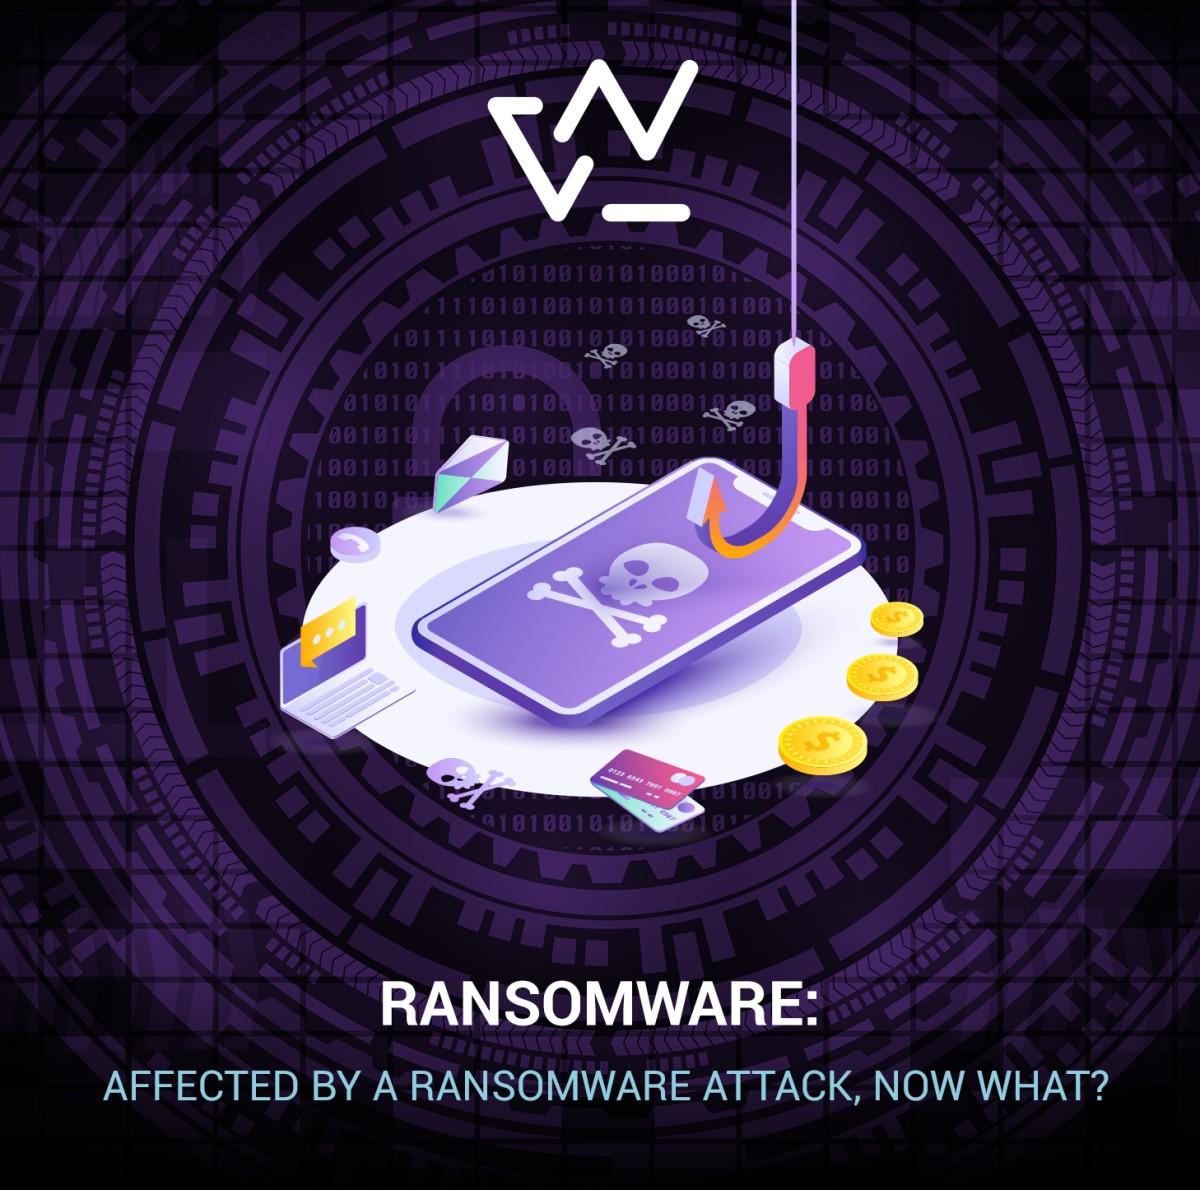 AFFECTED BY A RANSOMWARE ATTACK, NOW WHAT?